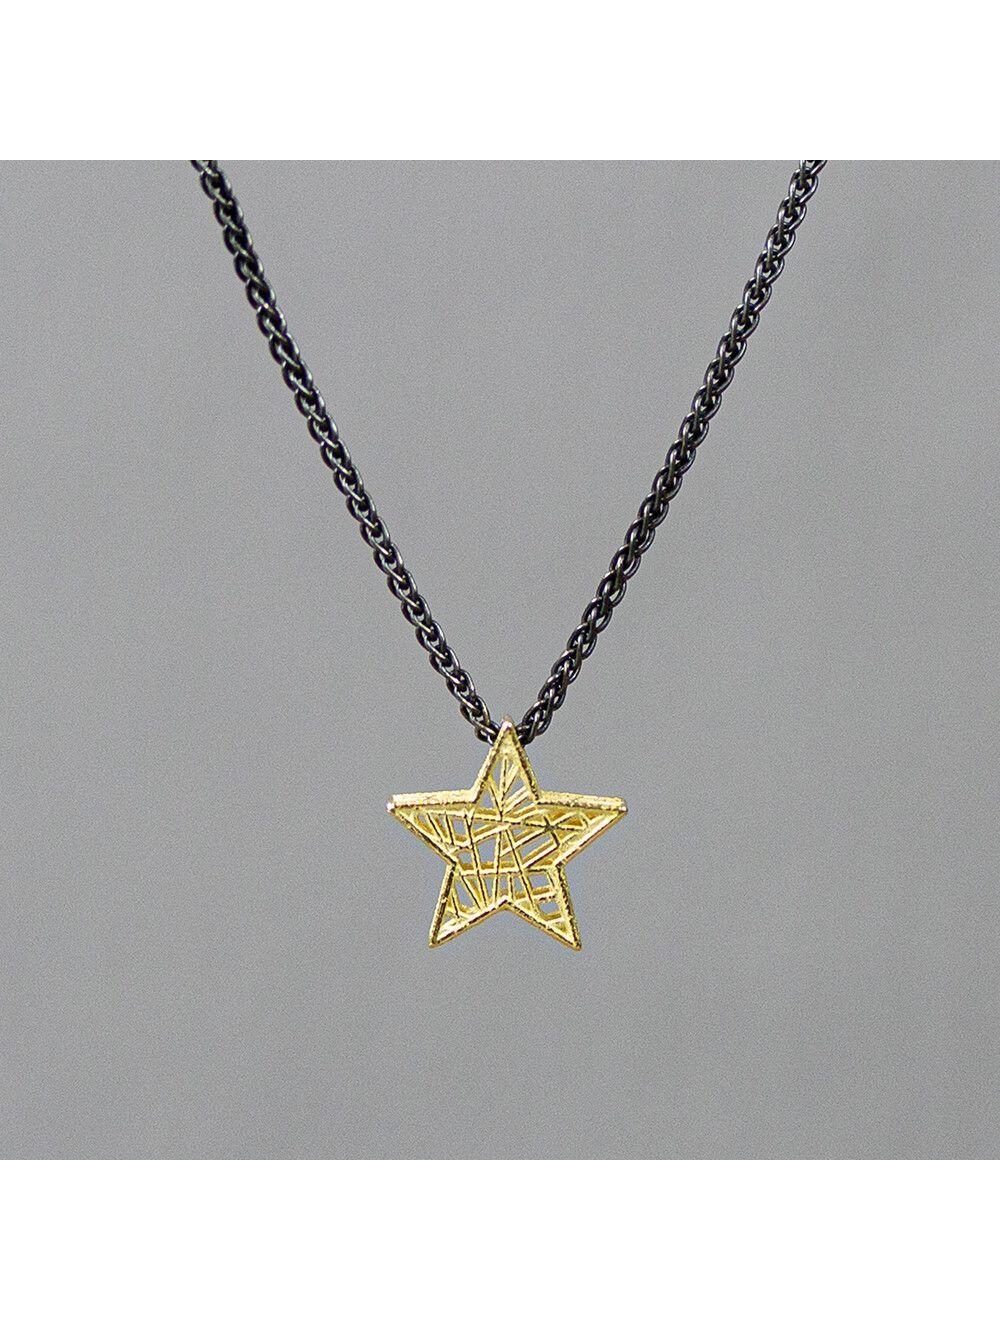 # Oxidized silver necklace with 14ct gold 3D star pendant